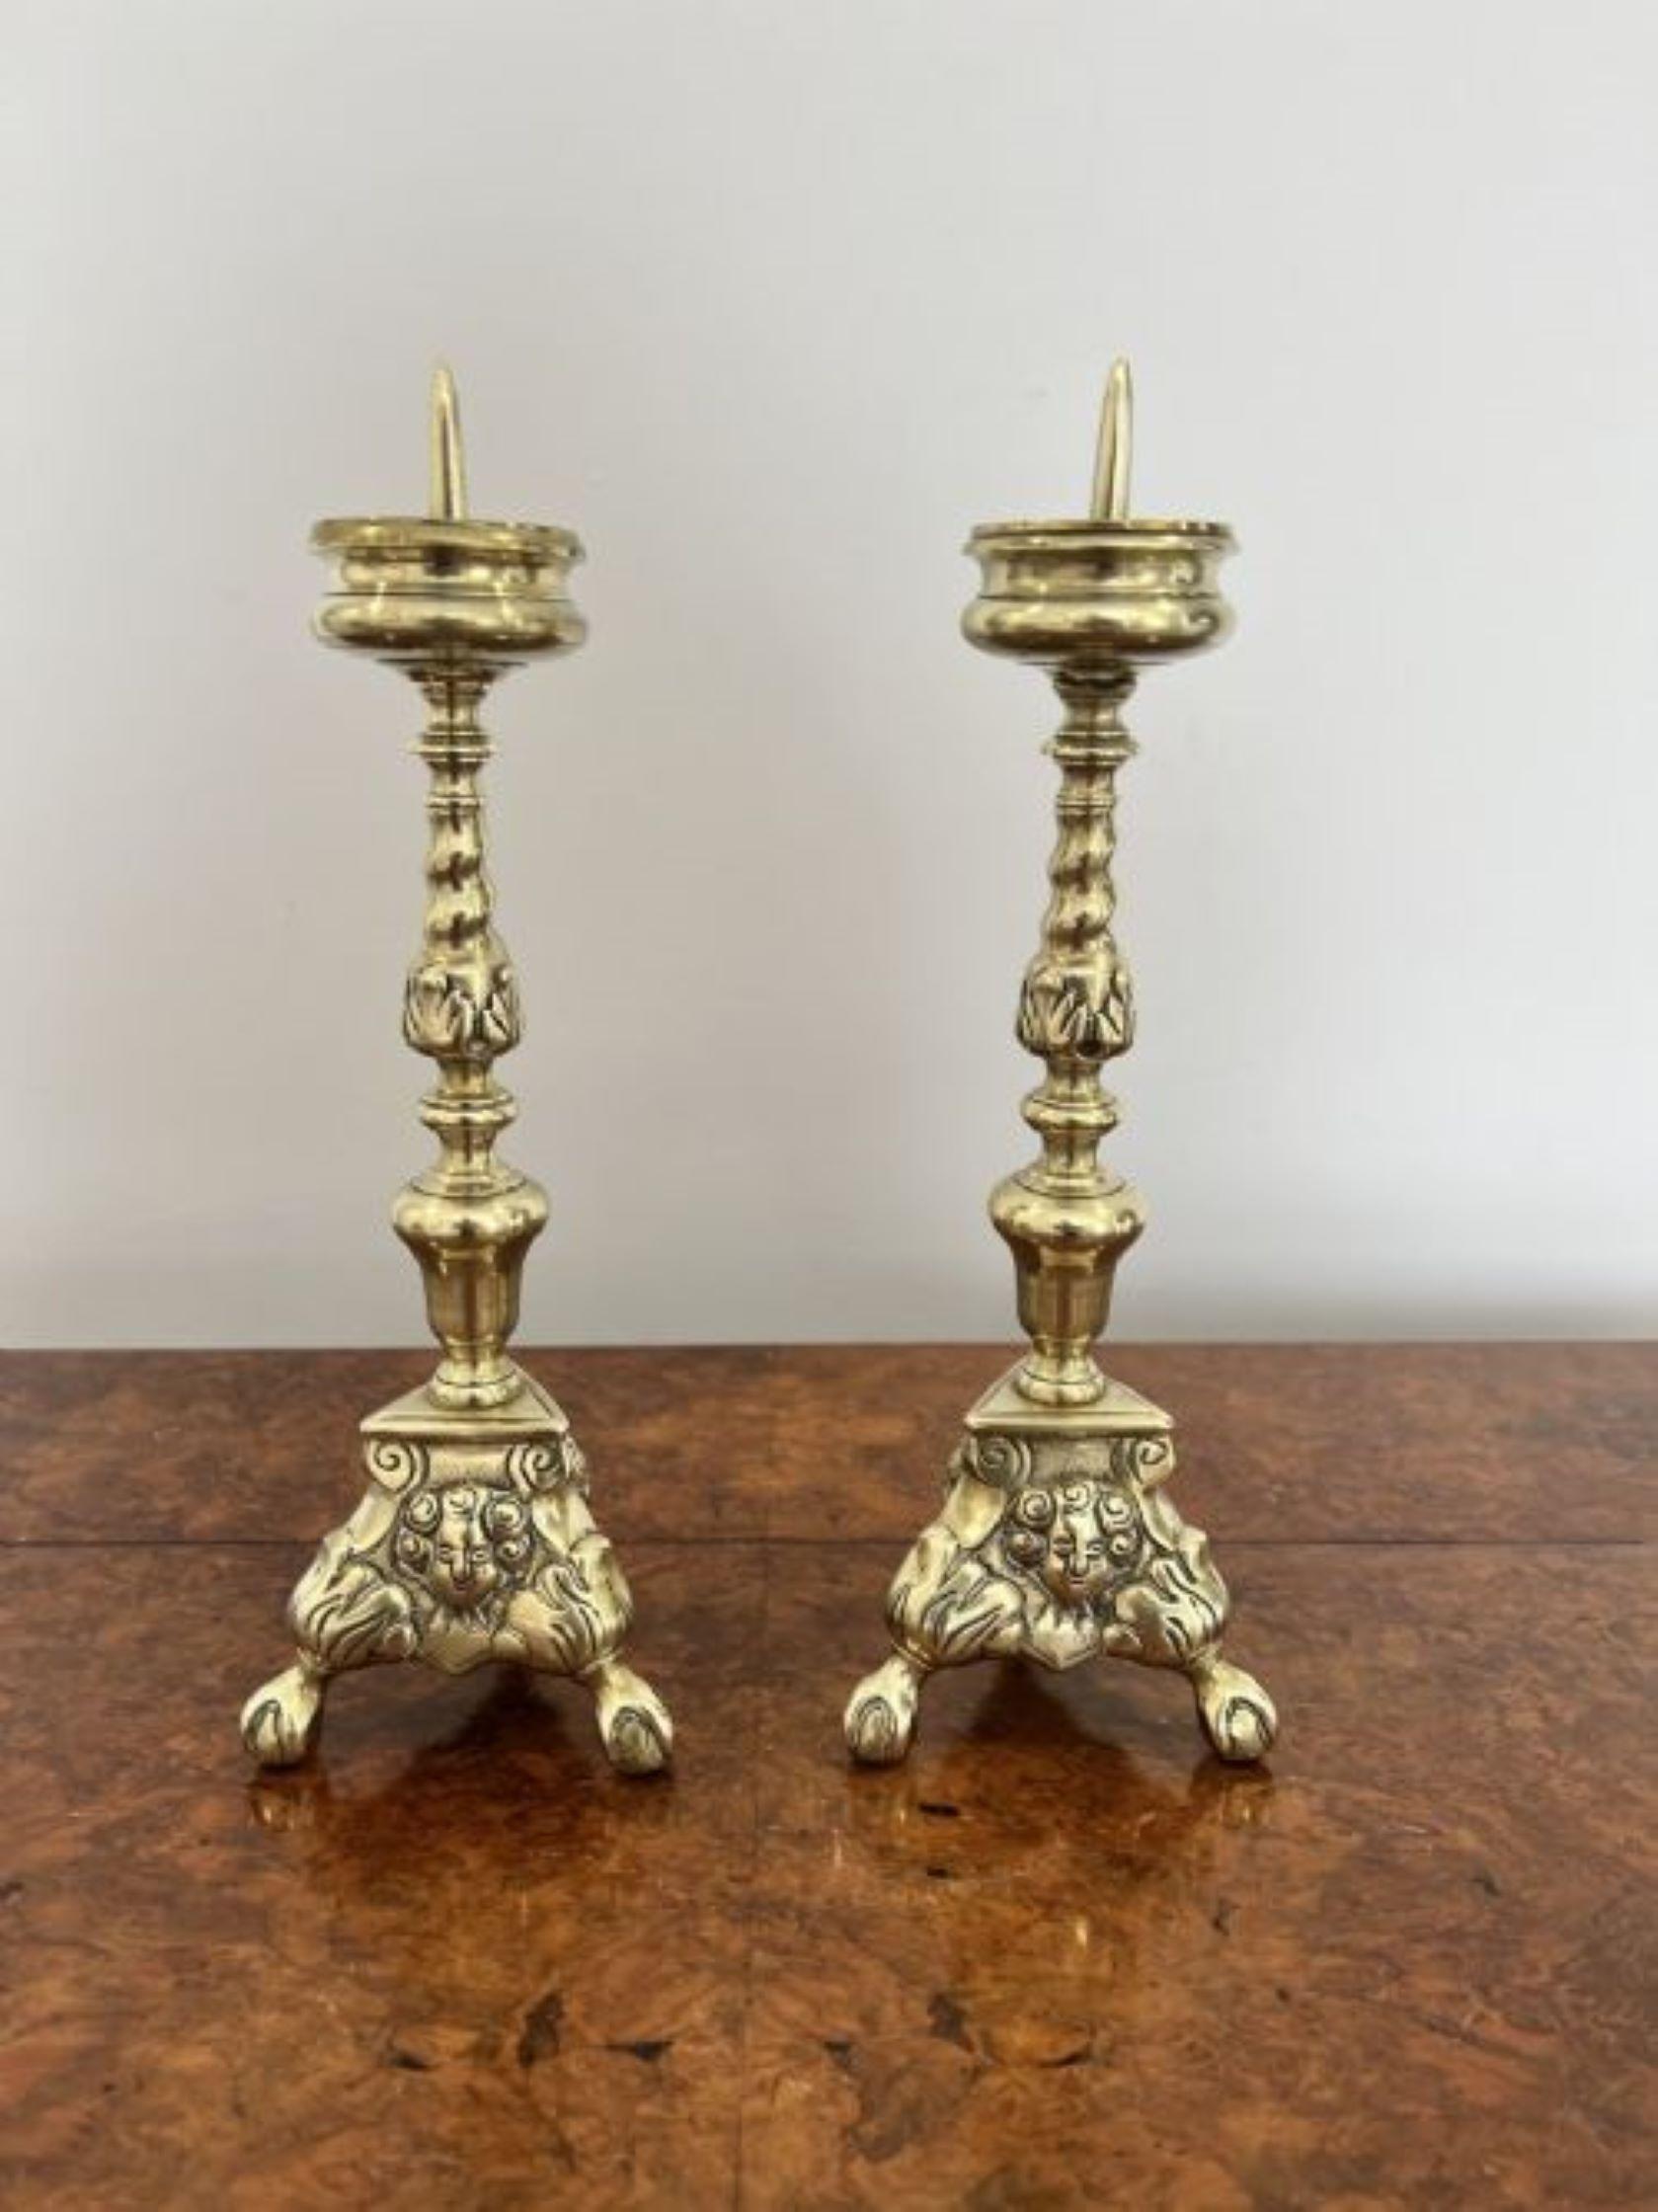 Quality Pair of Unusual Antique Victorian Ornate Brass Pricket Candlestick For Sale 1